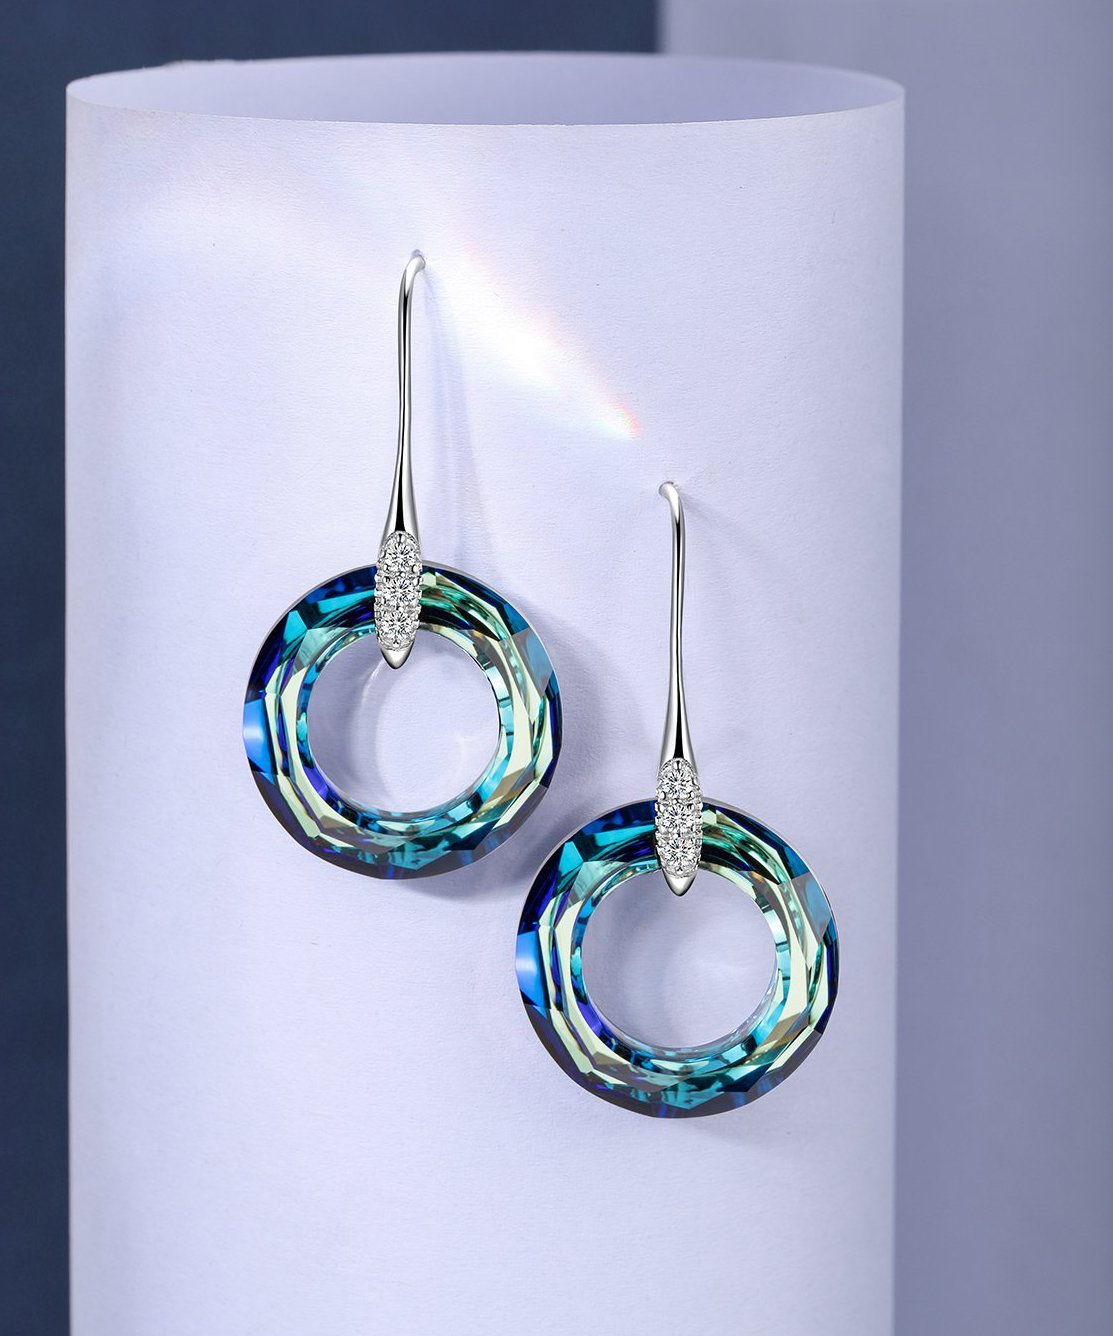 Enlightening Dangle Earrings With Austrian Crystals - Bermuda Blue in 18K White Gold Plated ITALY Design Elsy Style Earring